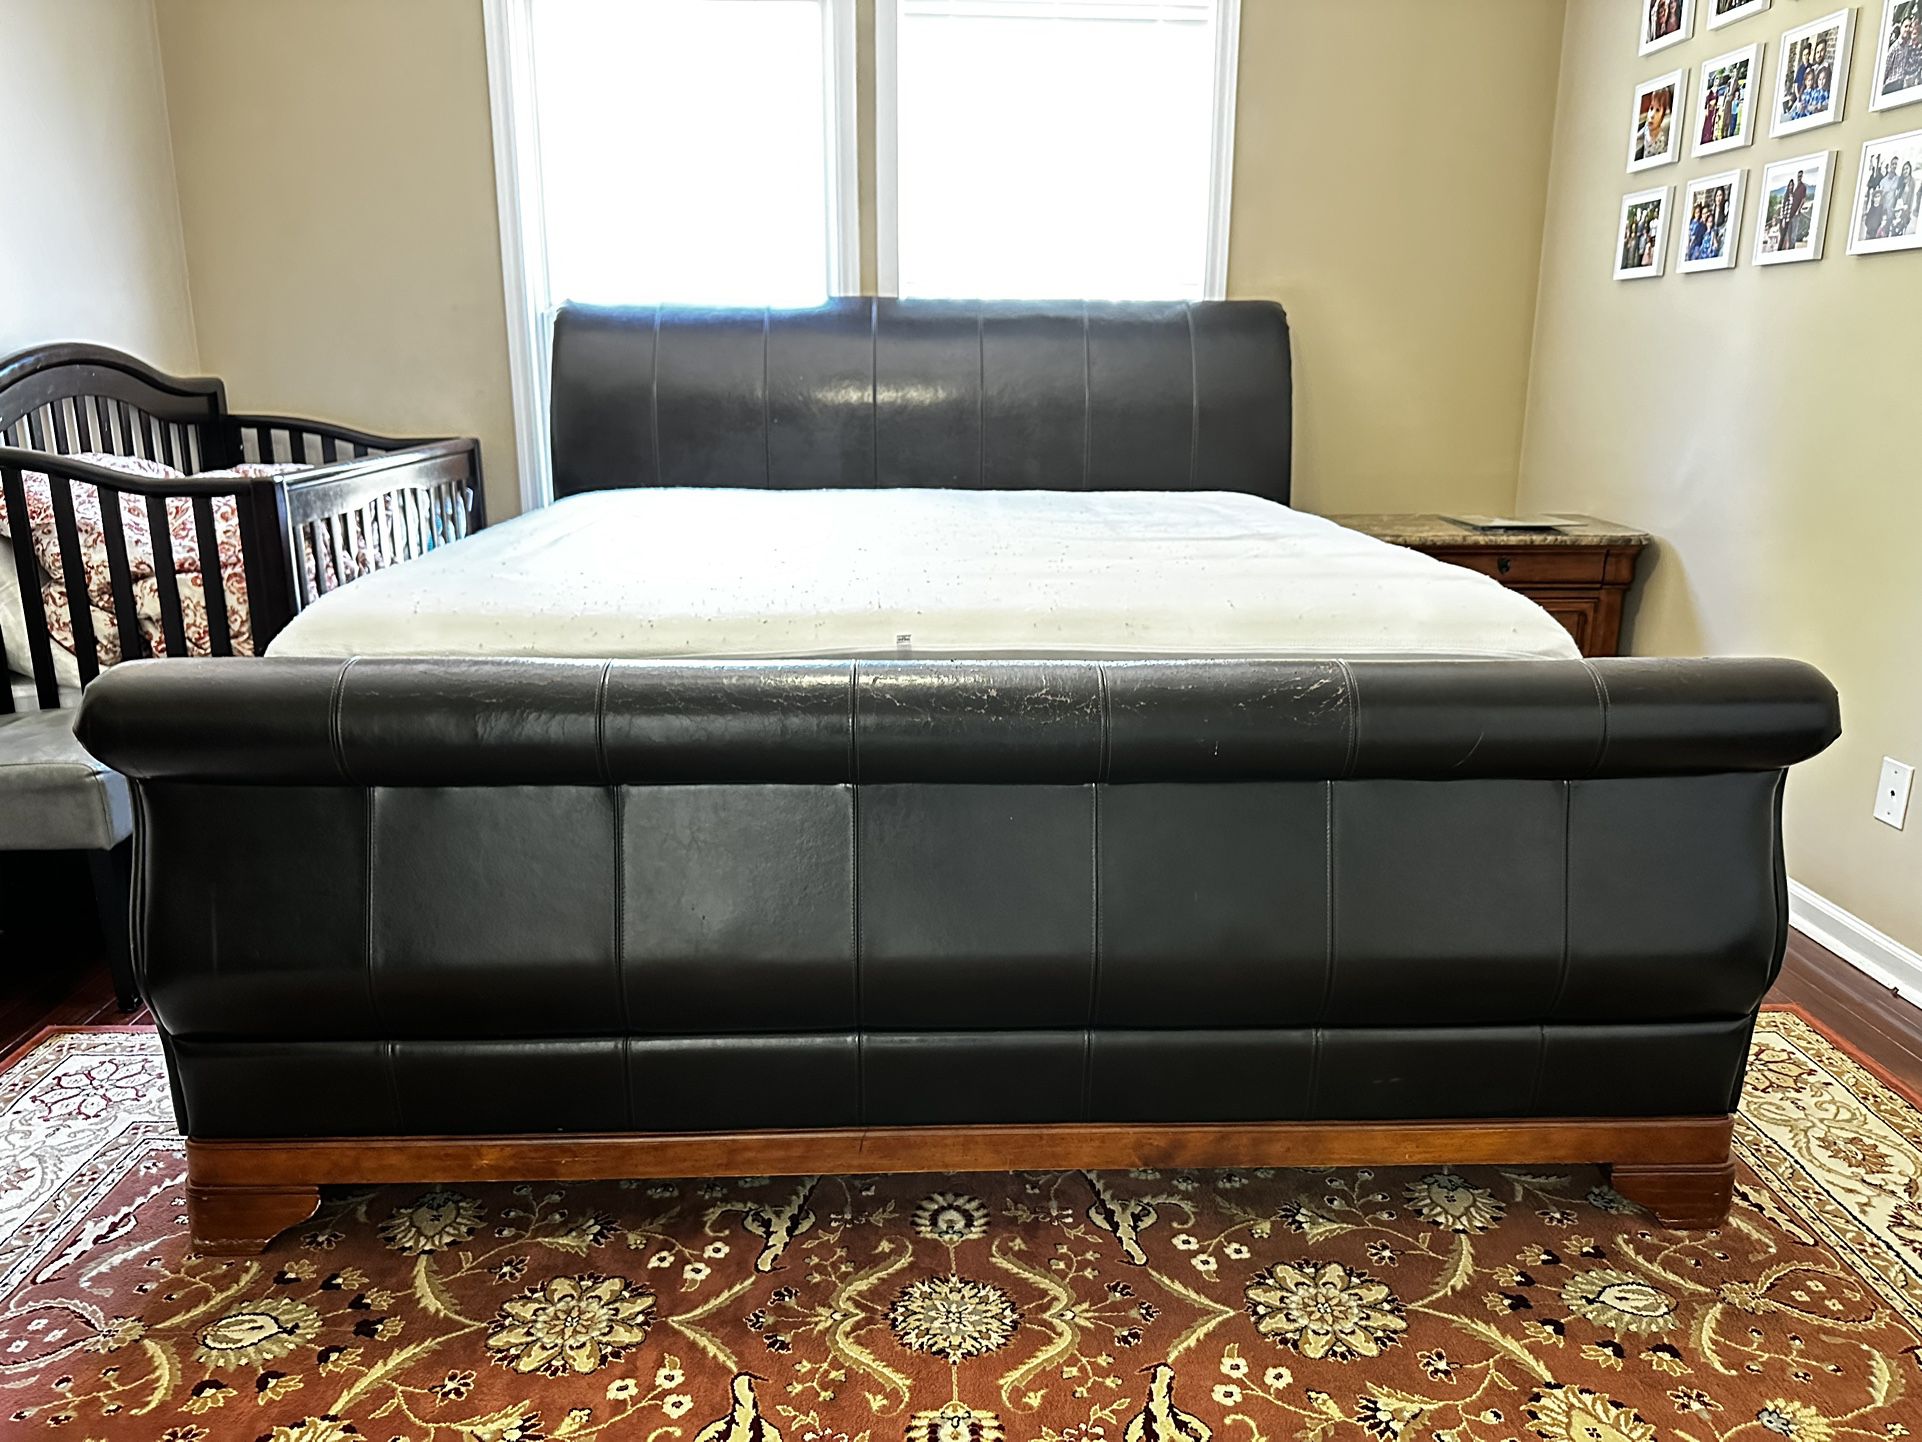 King size Sleigh Bed Frame and Dresser With Mirror and Night Stand. 